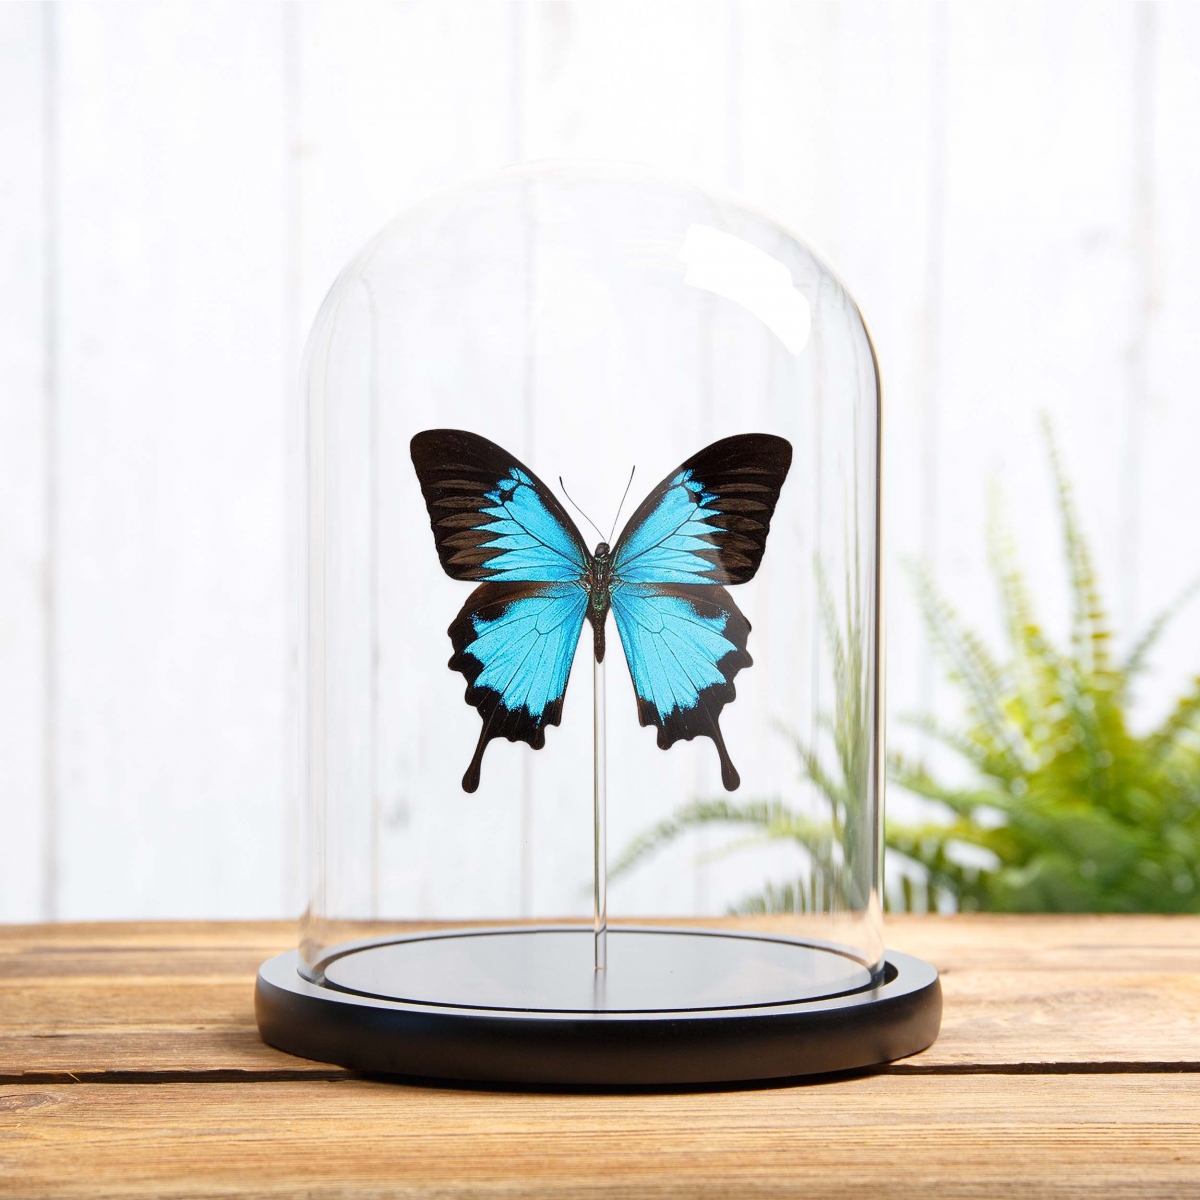 Minibeast Mountain Blue Swallowtail in Glass Dome with Wooden Base (Papilio ulysses)